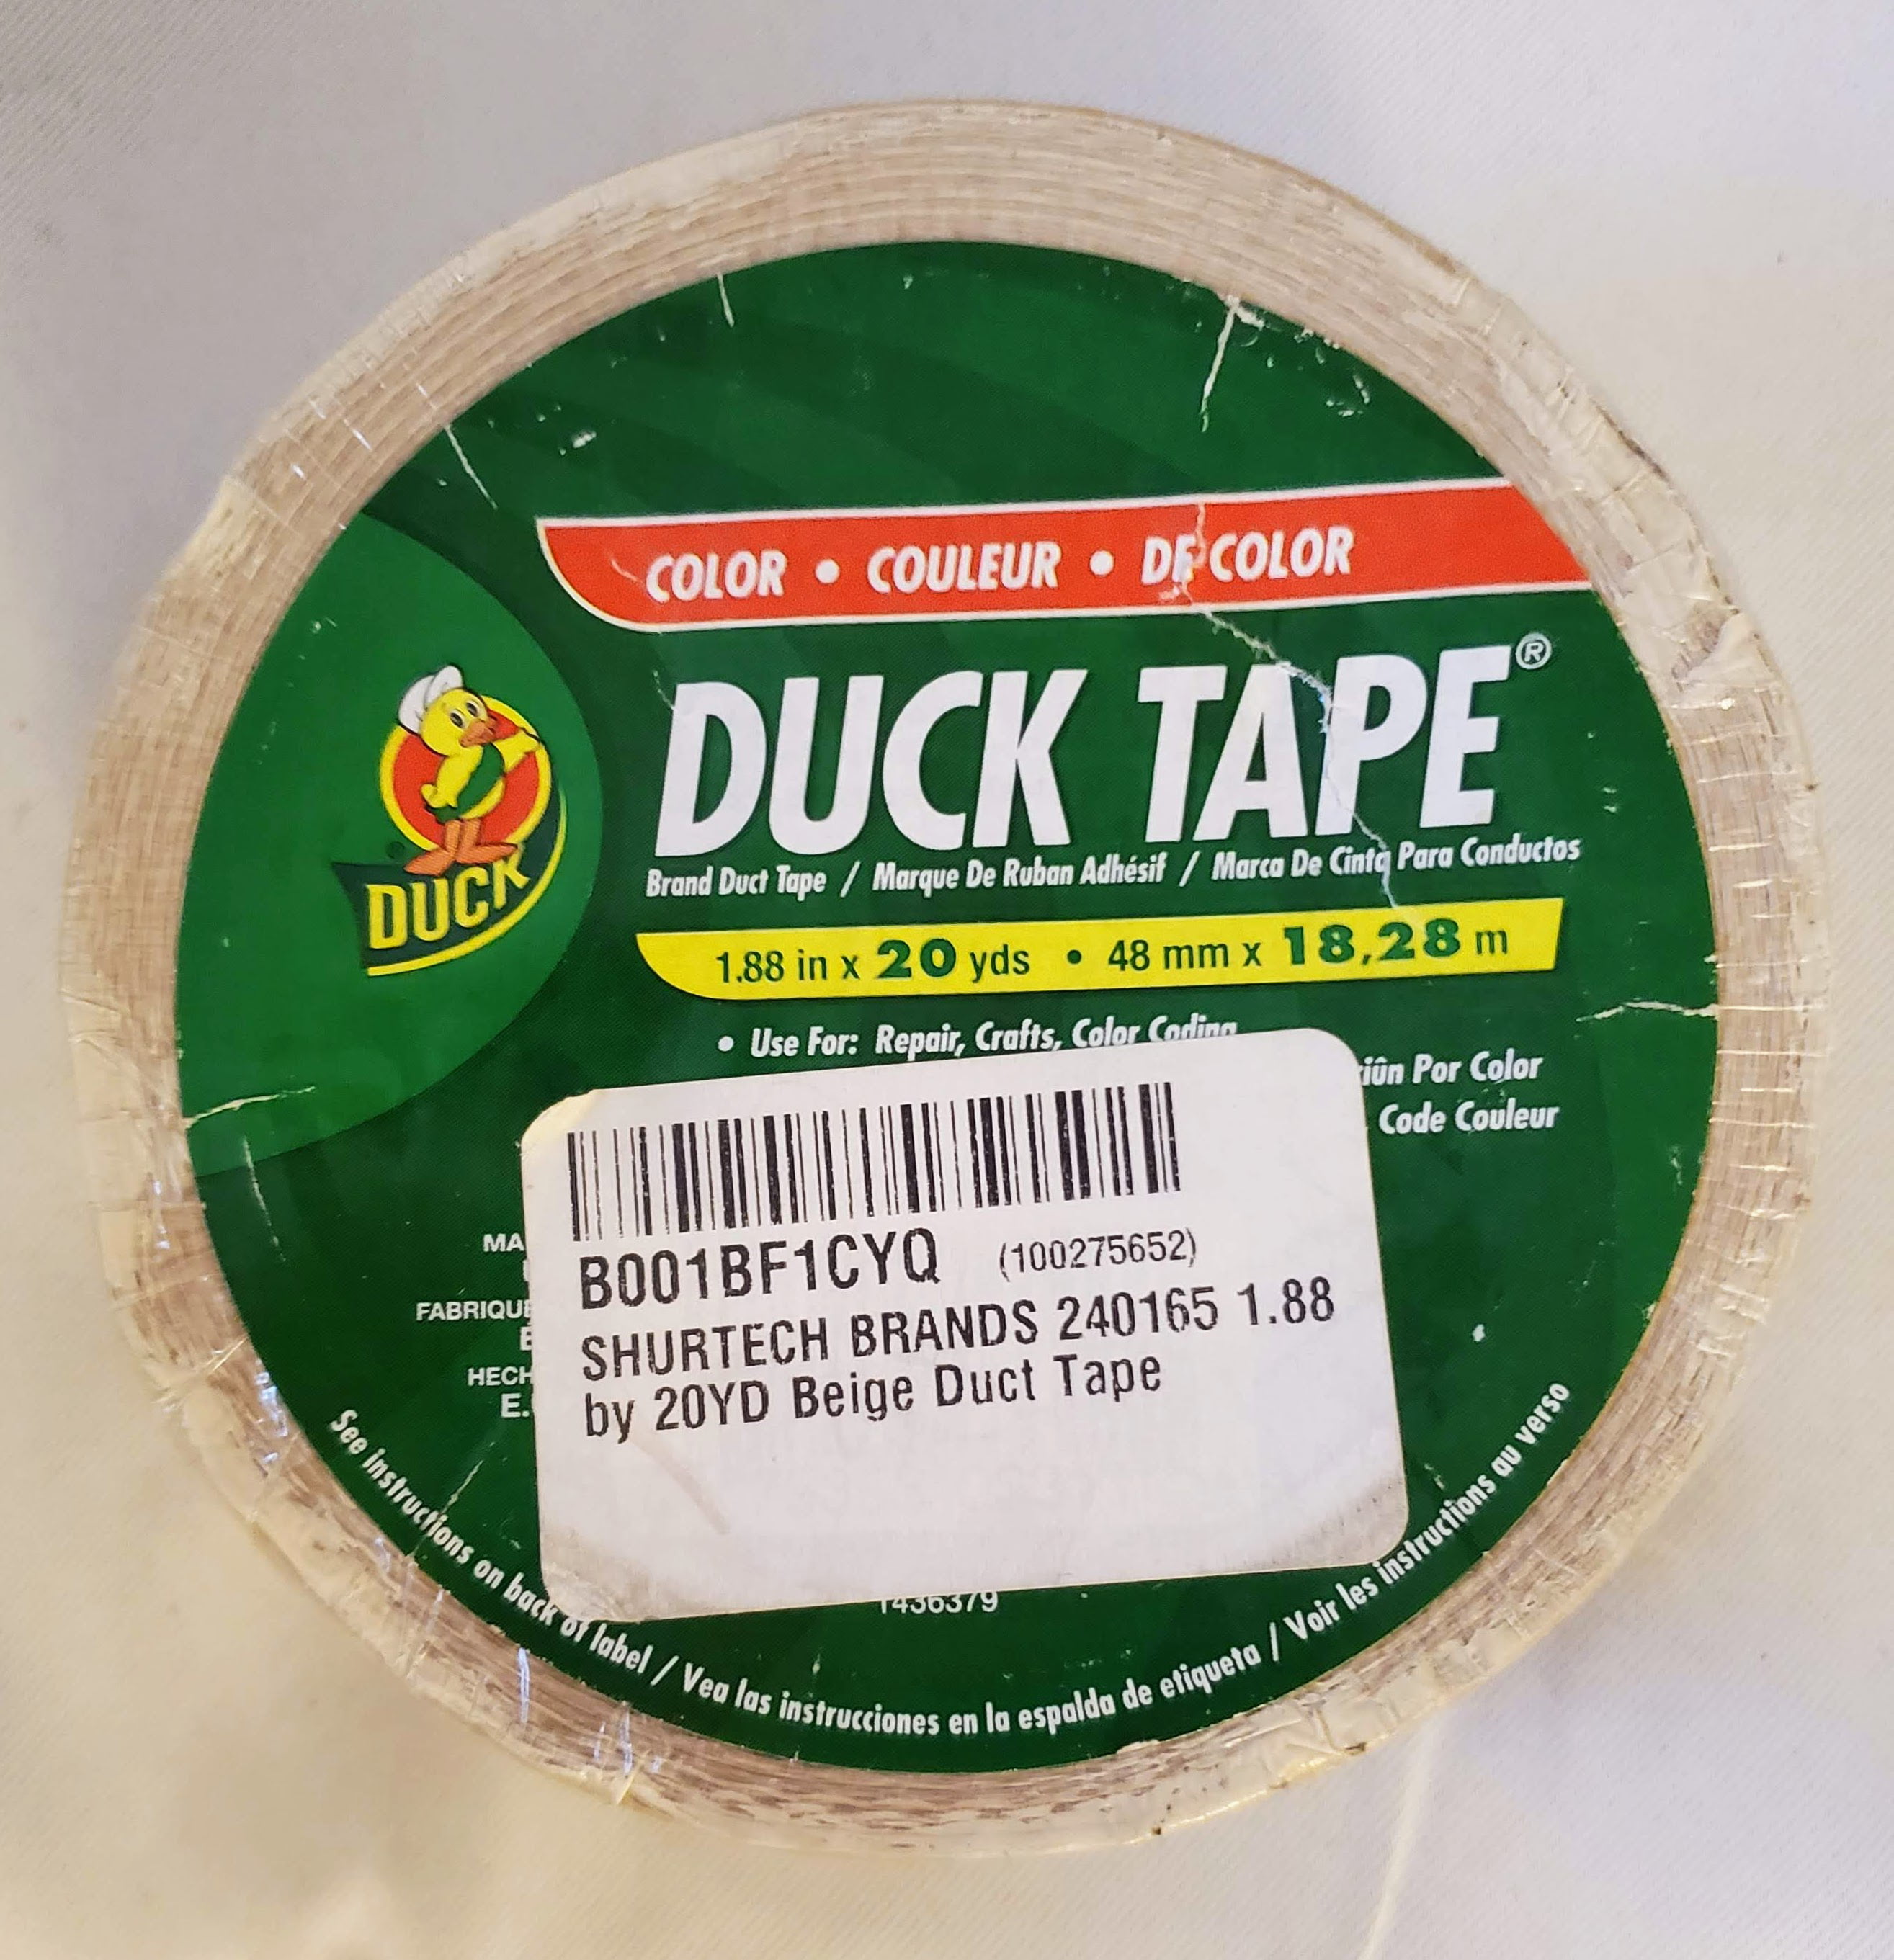 Beige Duck Tape ShurTech 1124160 repairs crafts color coding multiple uses 3PK 